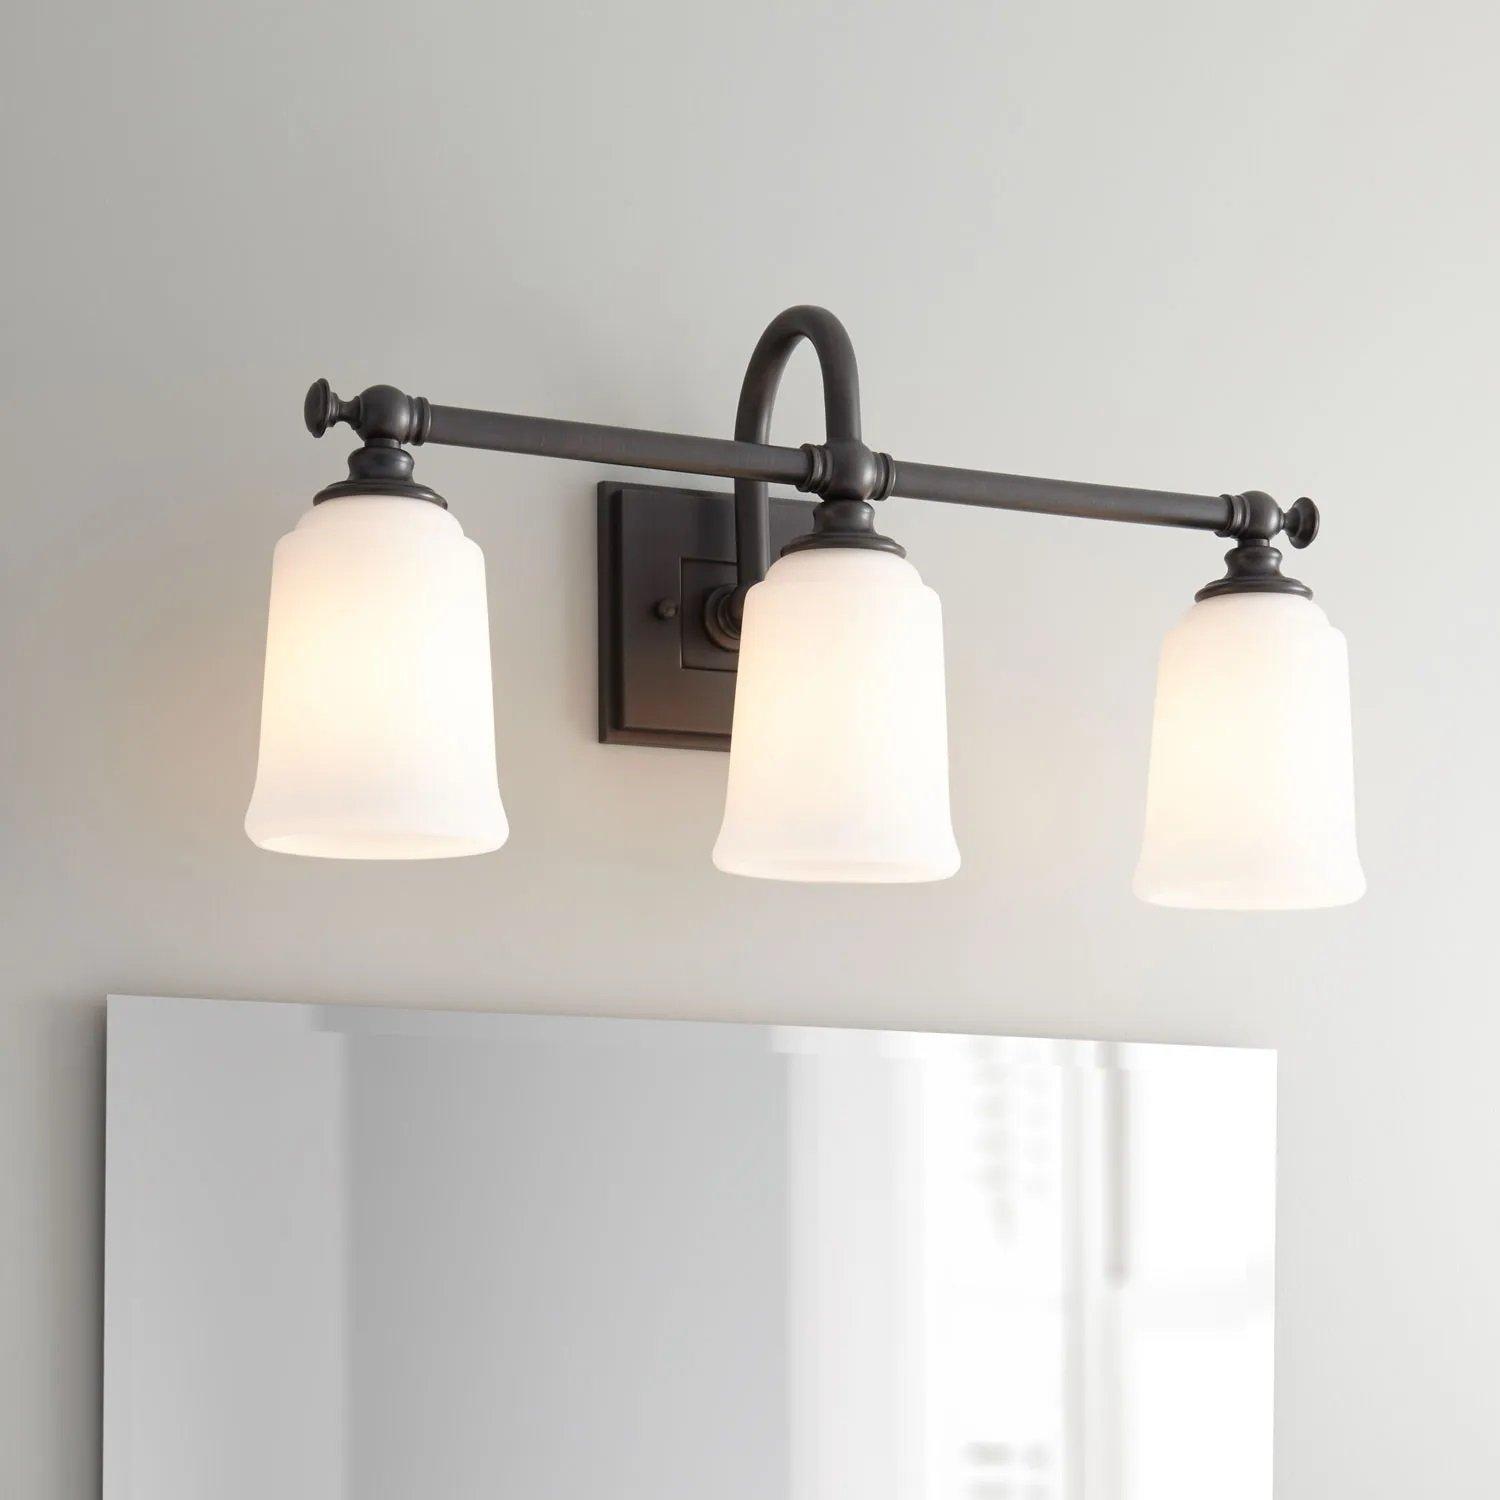 Wall Light With 3 Lights